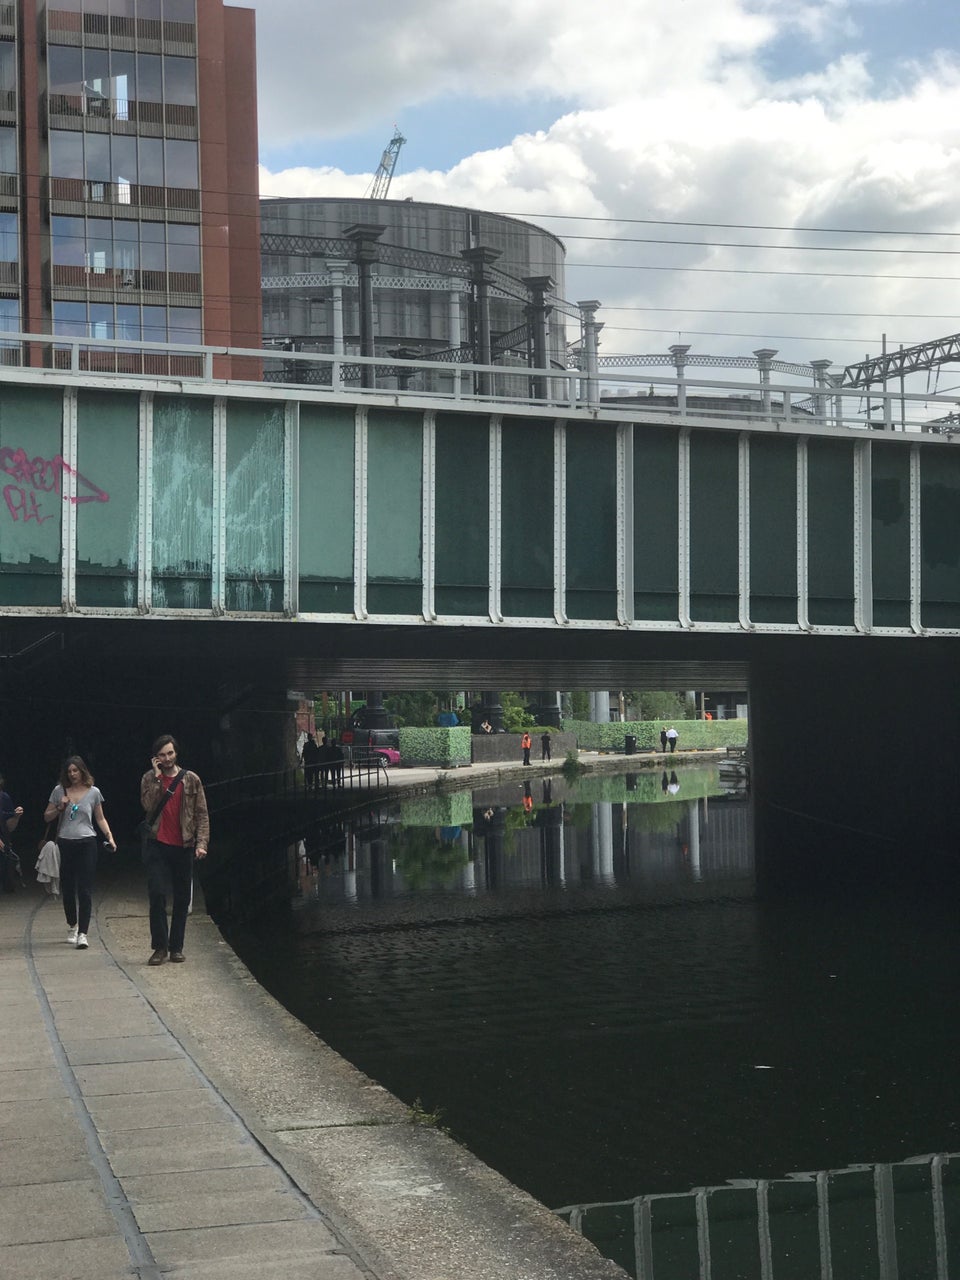 Photo of Regent's Canal